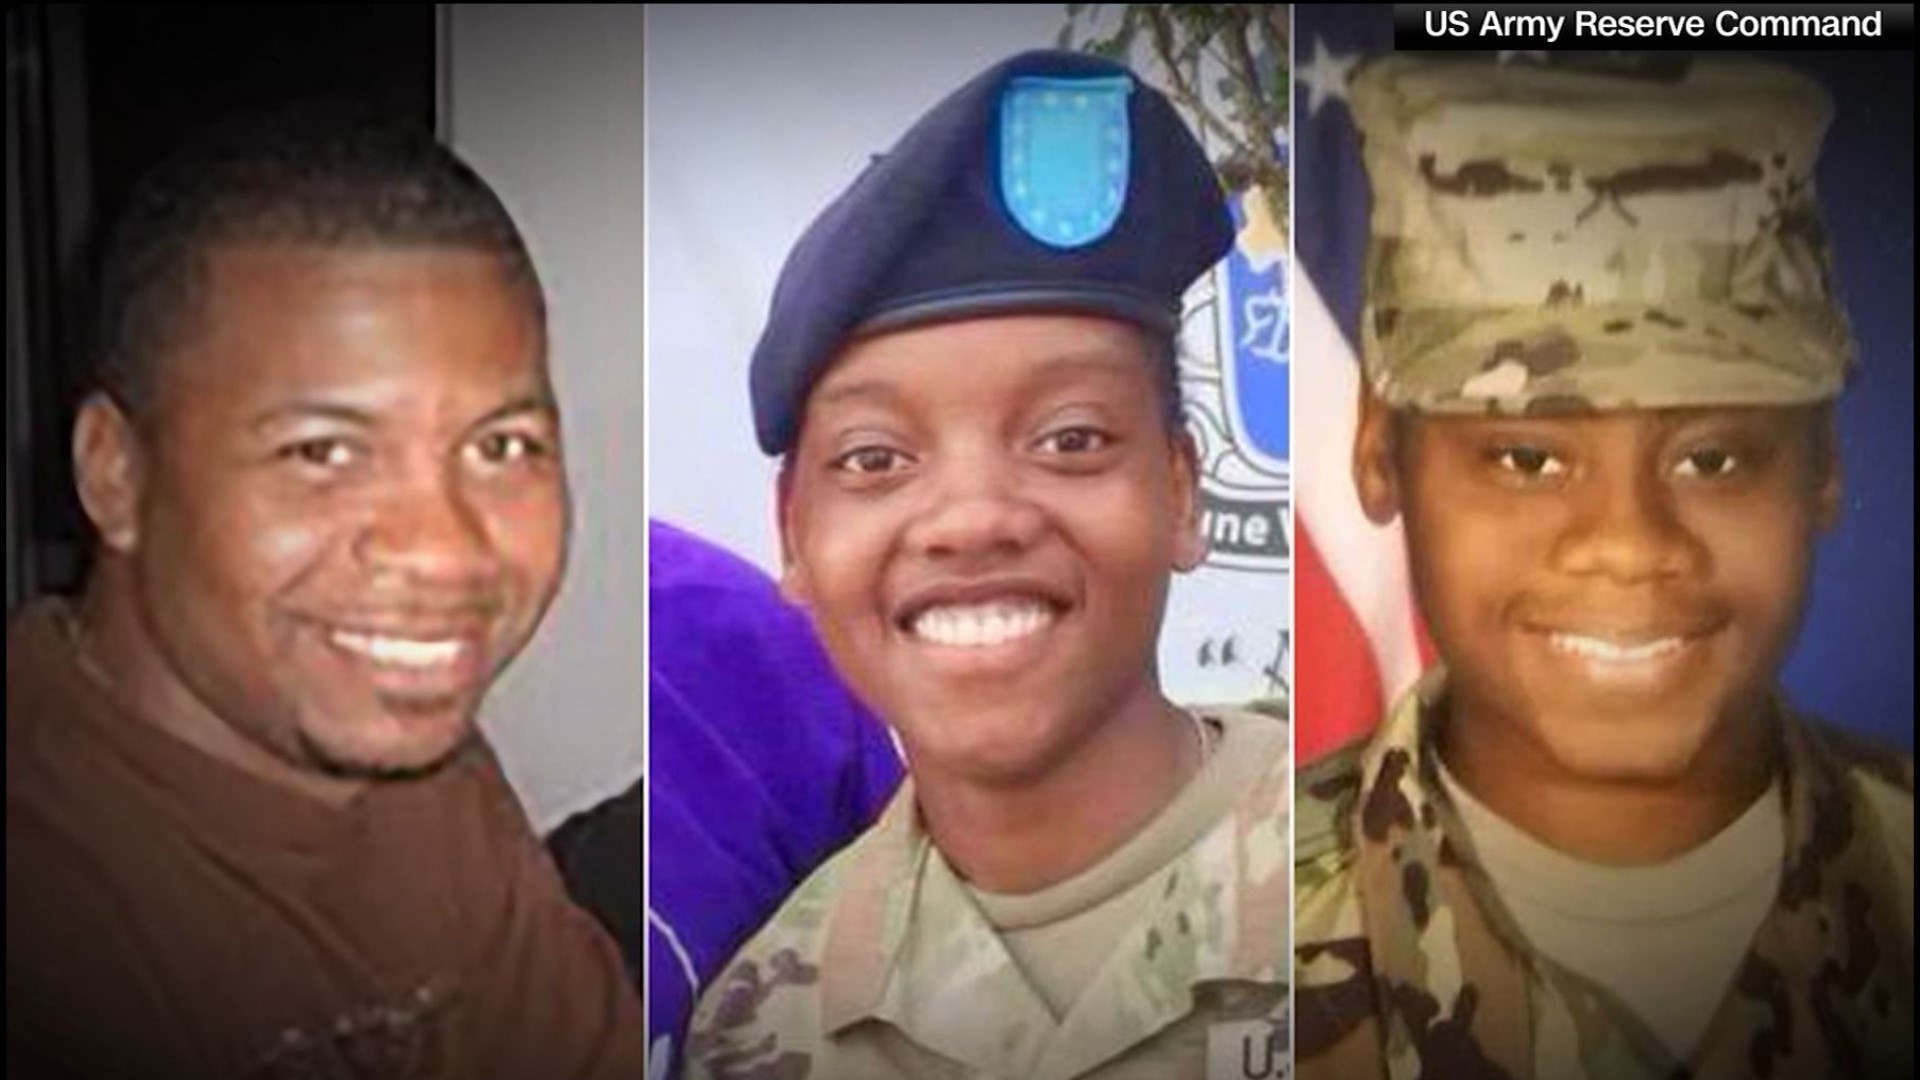 Sgt. William Jerome Rivers, Spc. Kennedy Ladon Sanders, and Spc. Breonna Alexsondria Moffett died in a weekend drone attack attack at a base in Jordan.